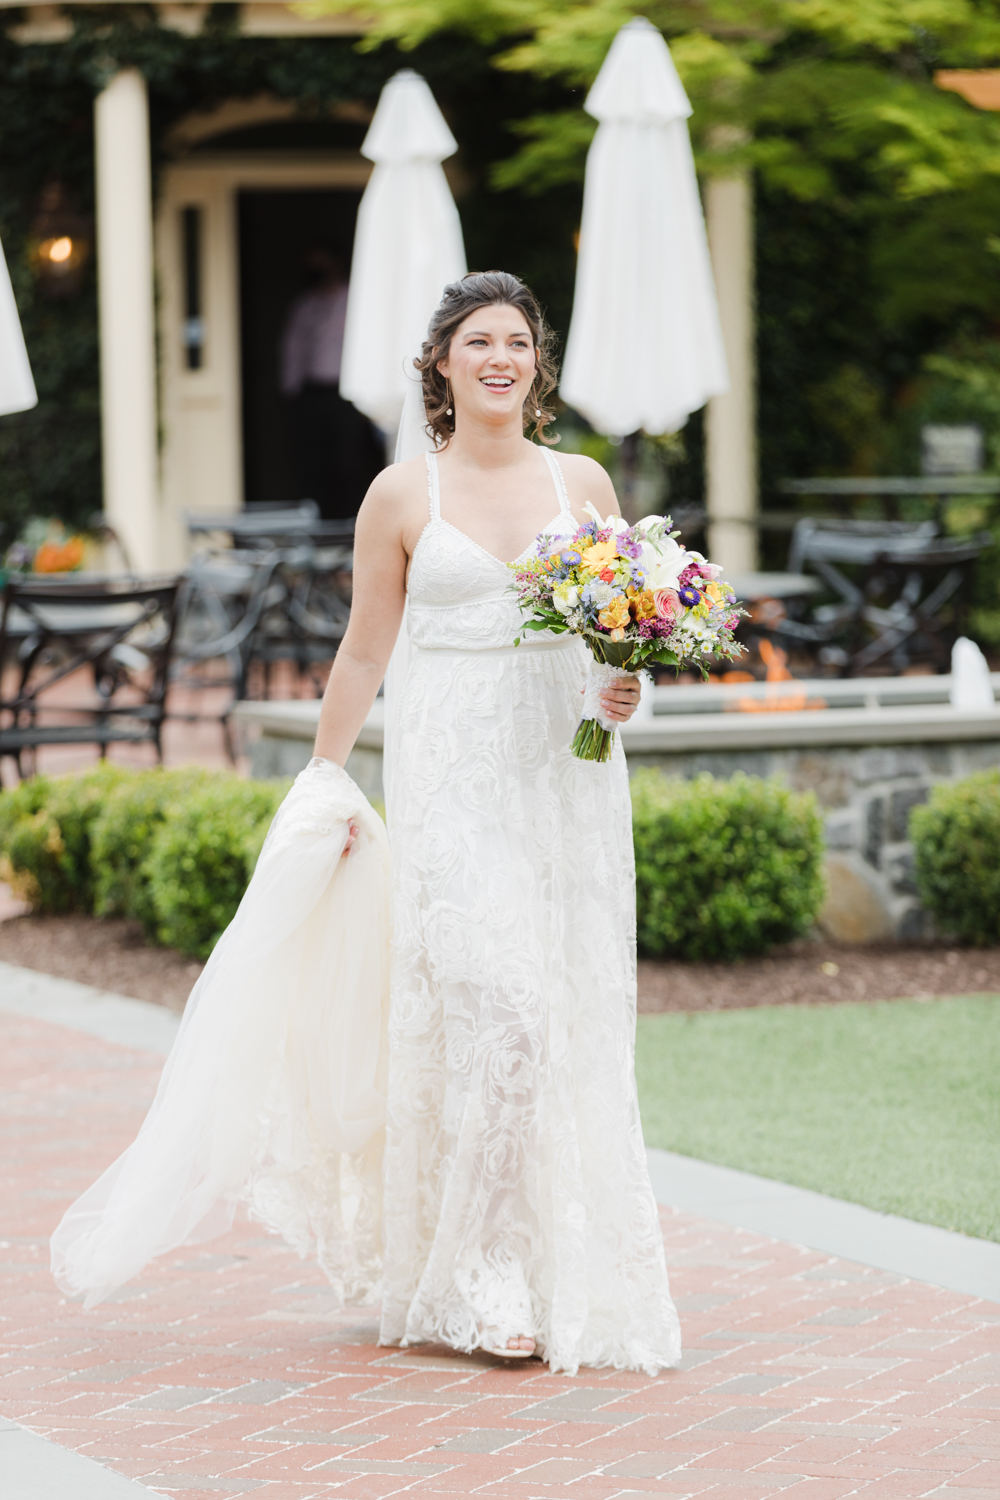 david's country inn rustic chic wedding grace brown photography